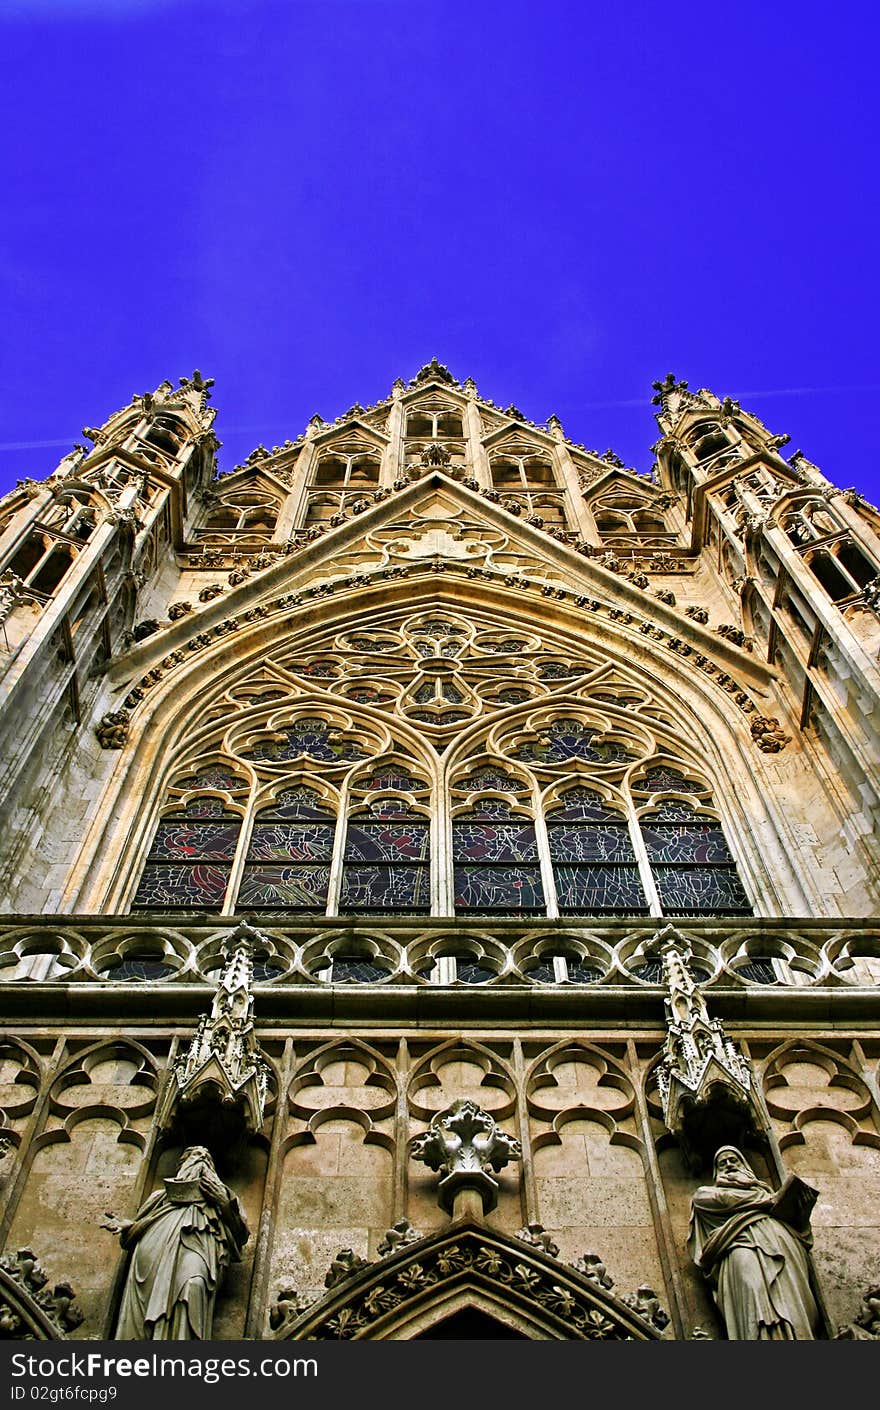 A typical Gothic Cathedral in the old medieval district of Vienna. The image shows a detail of a beautifully colored strained-glass window a trademark of the Gothic architecture. A typical Gothic Cathedral in the old medieval district of Vienna. The image shows a detail of a beautifully colored strained-glass window a trademark of the Gothic architecture.